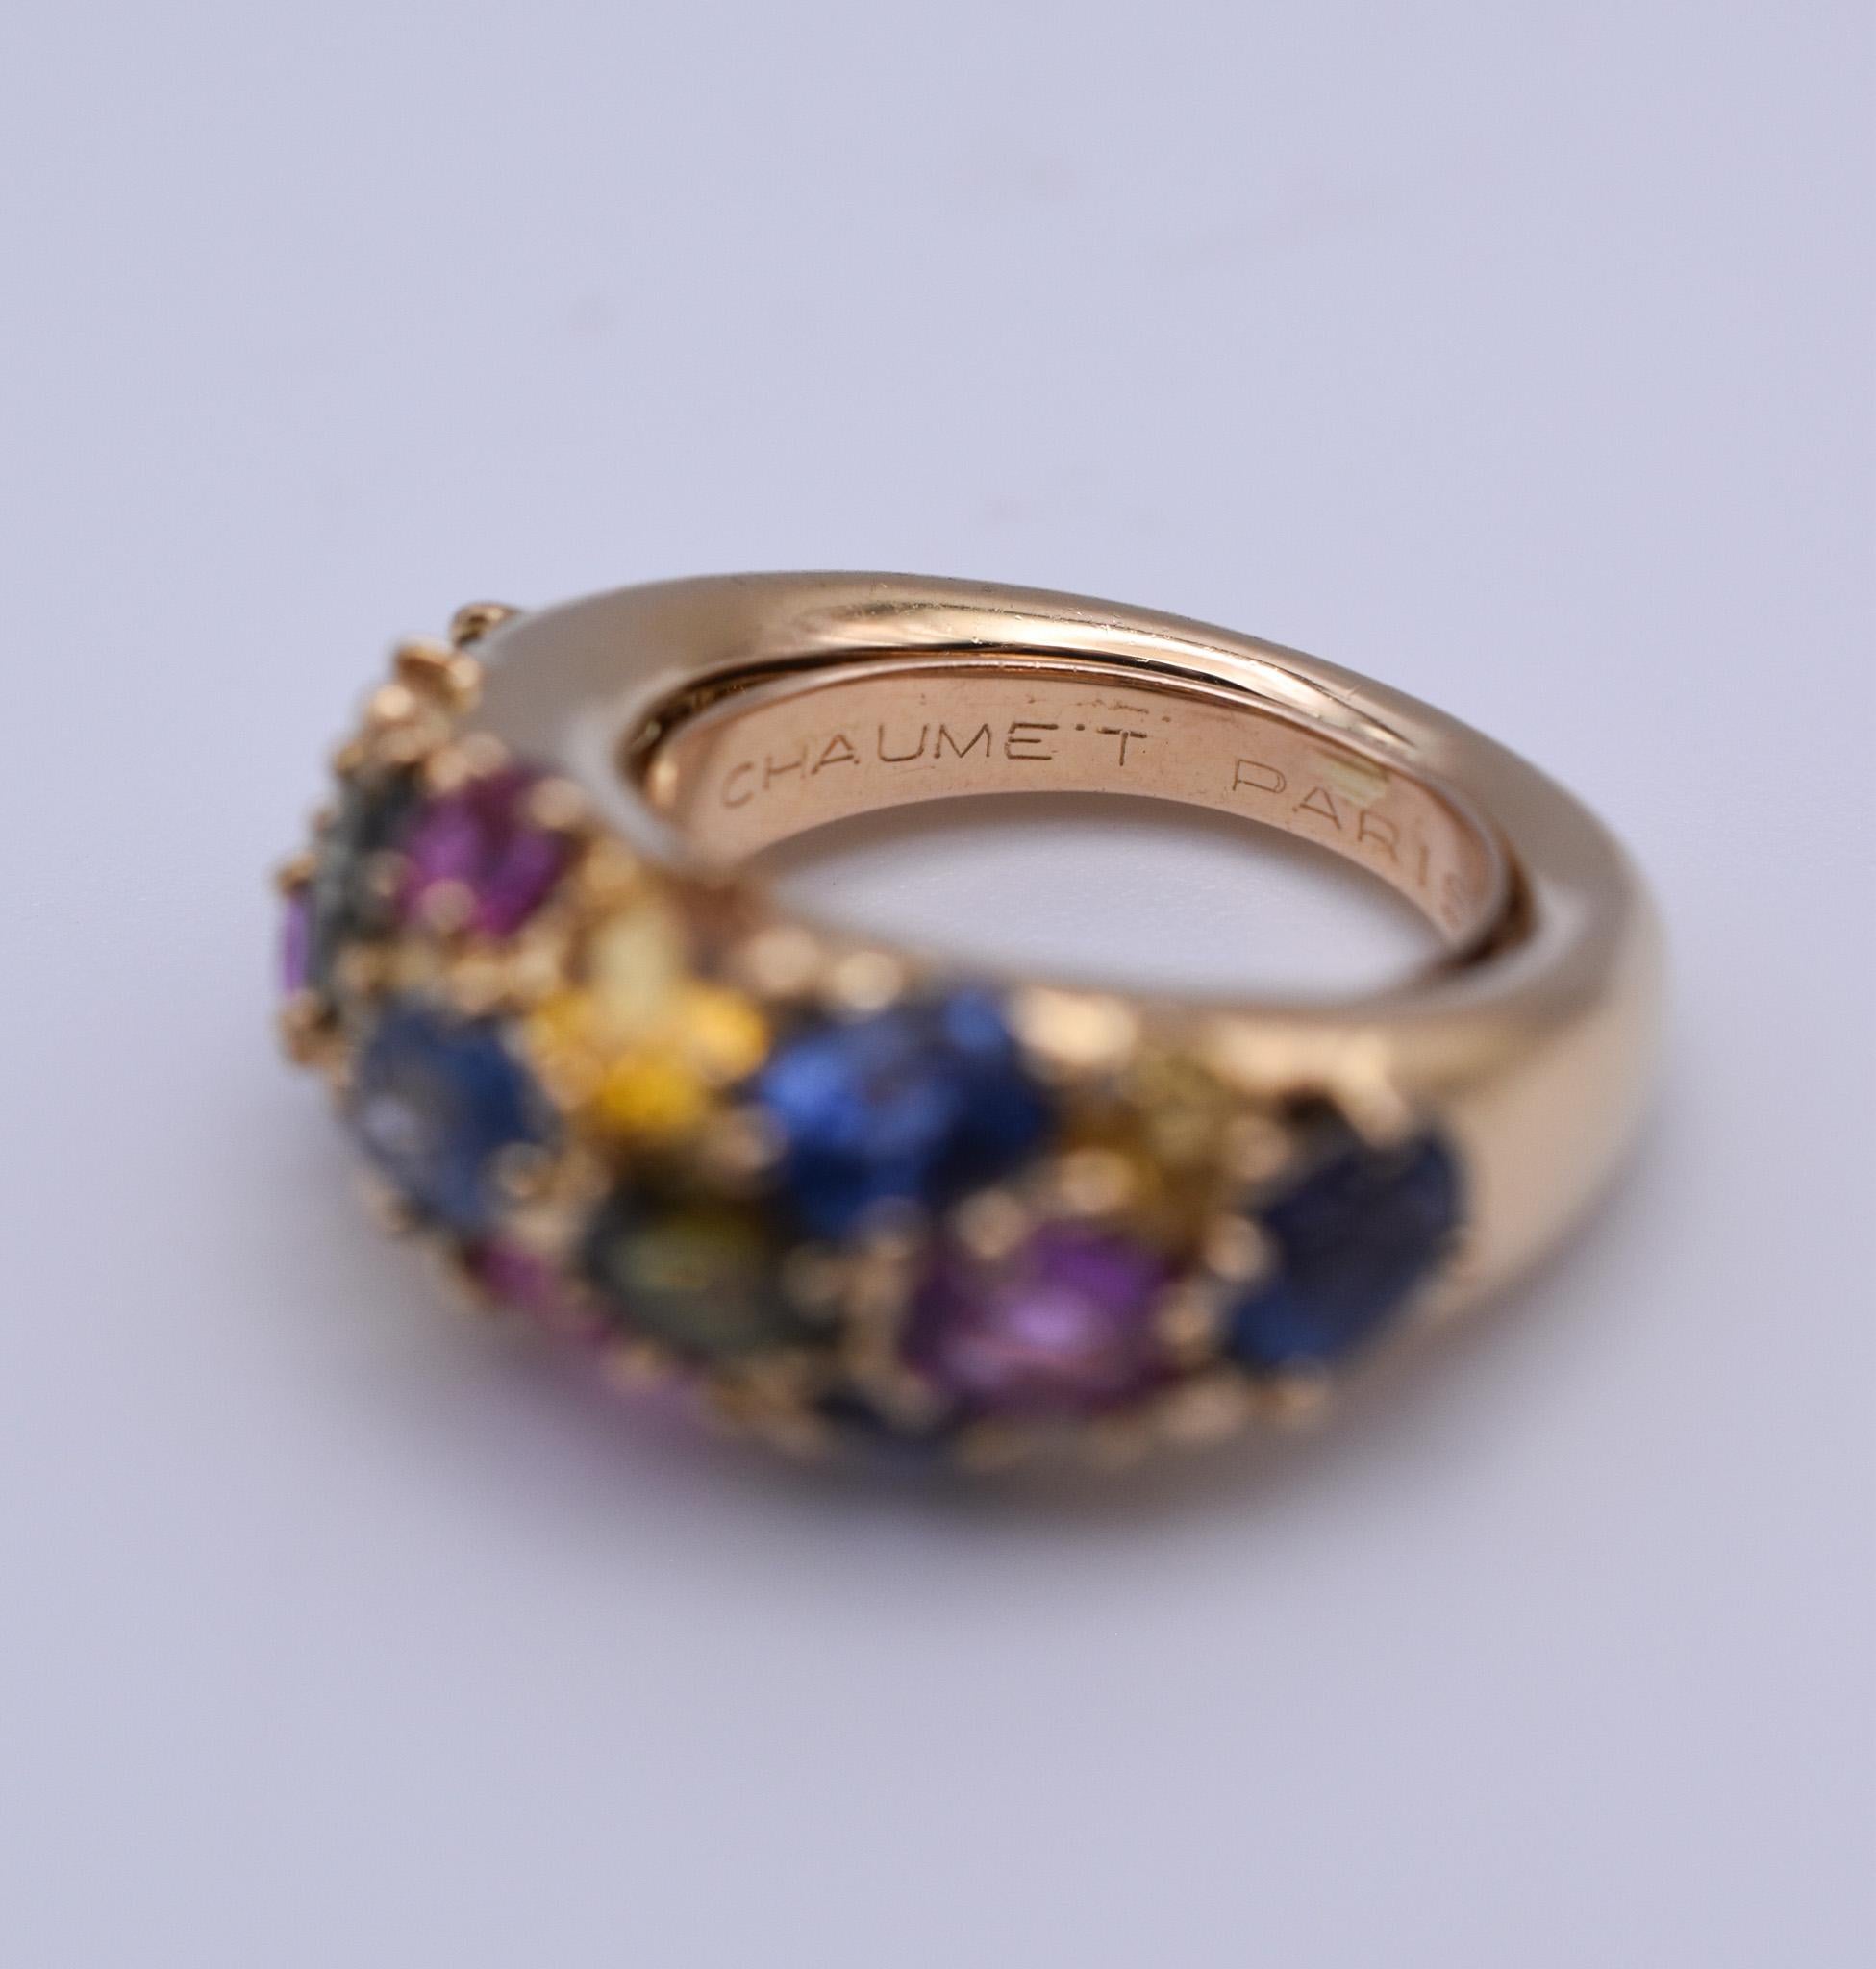 Chaumet 18k Gold Multi-colour Sapphire Earrings and Ring Set In Excellent Condition For Sale In New York, NY